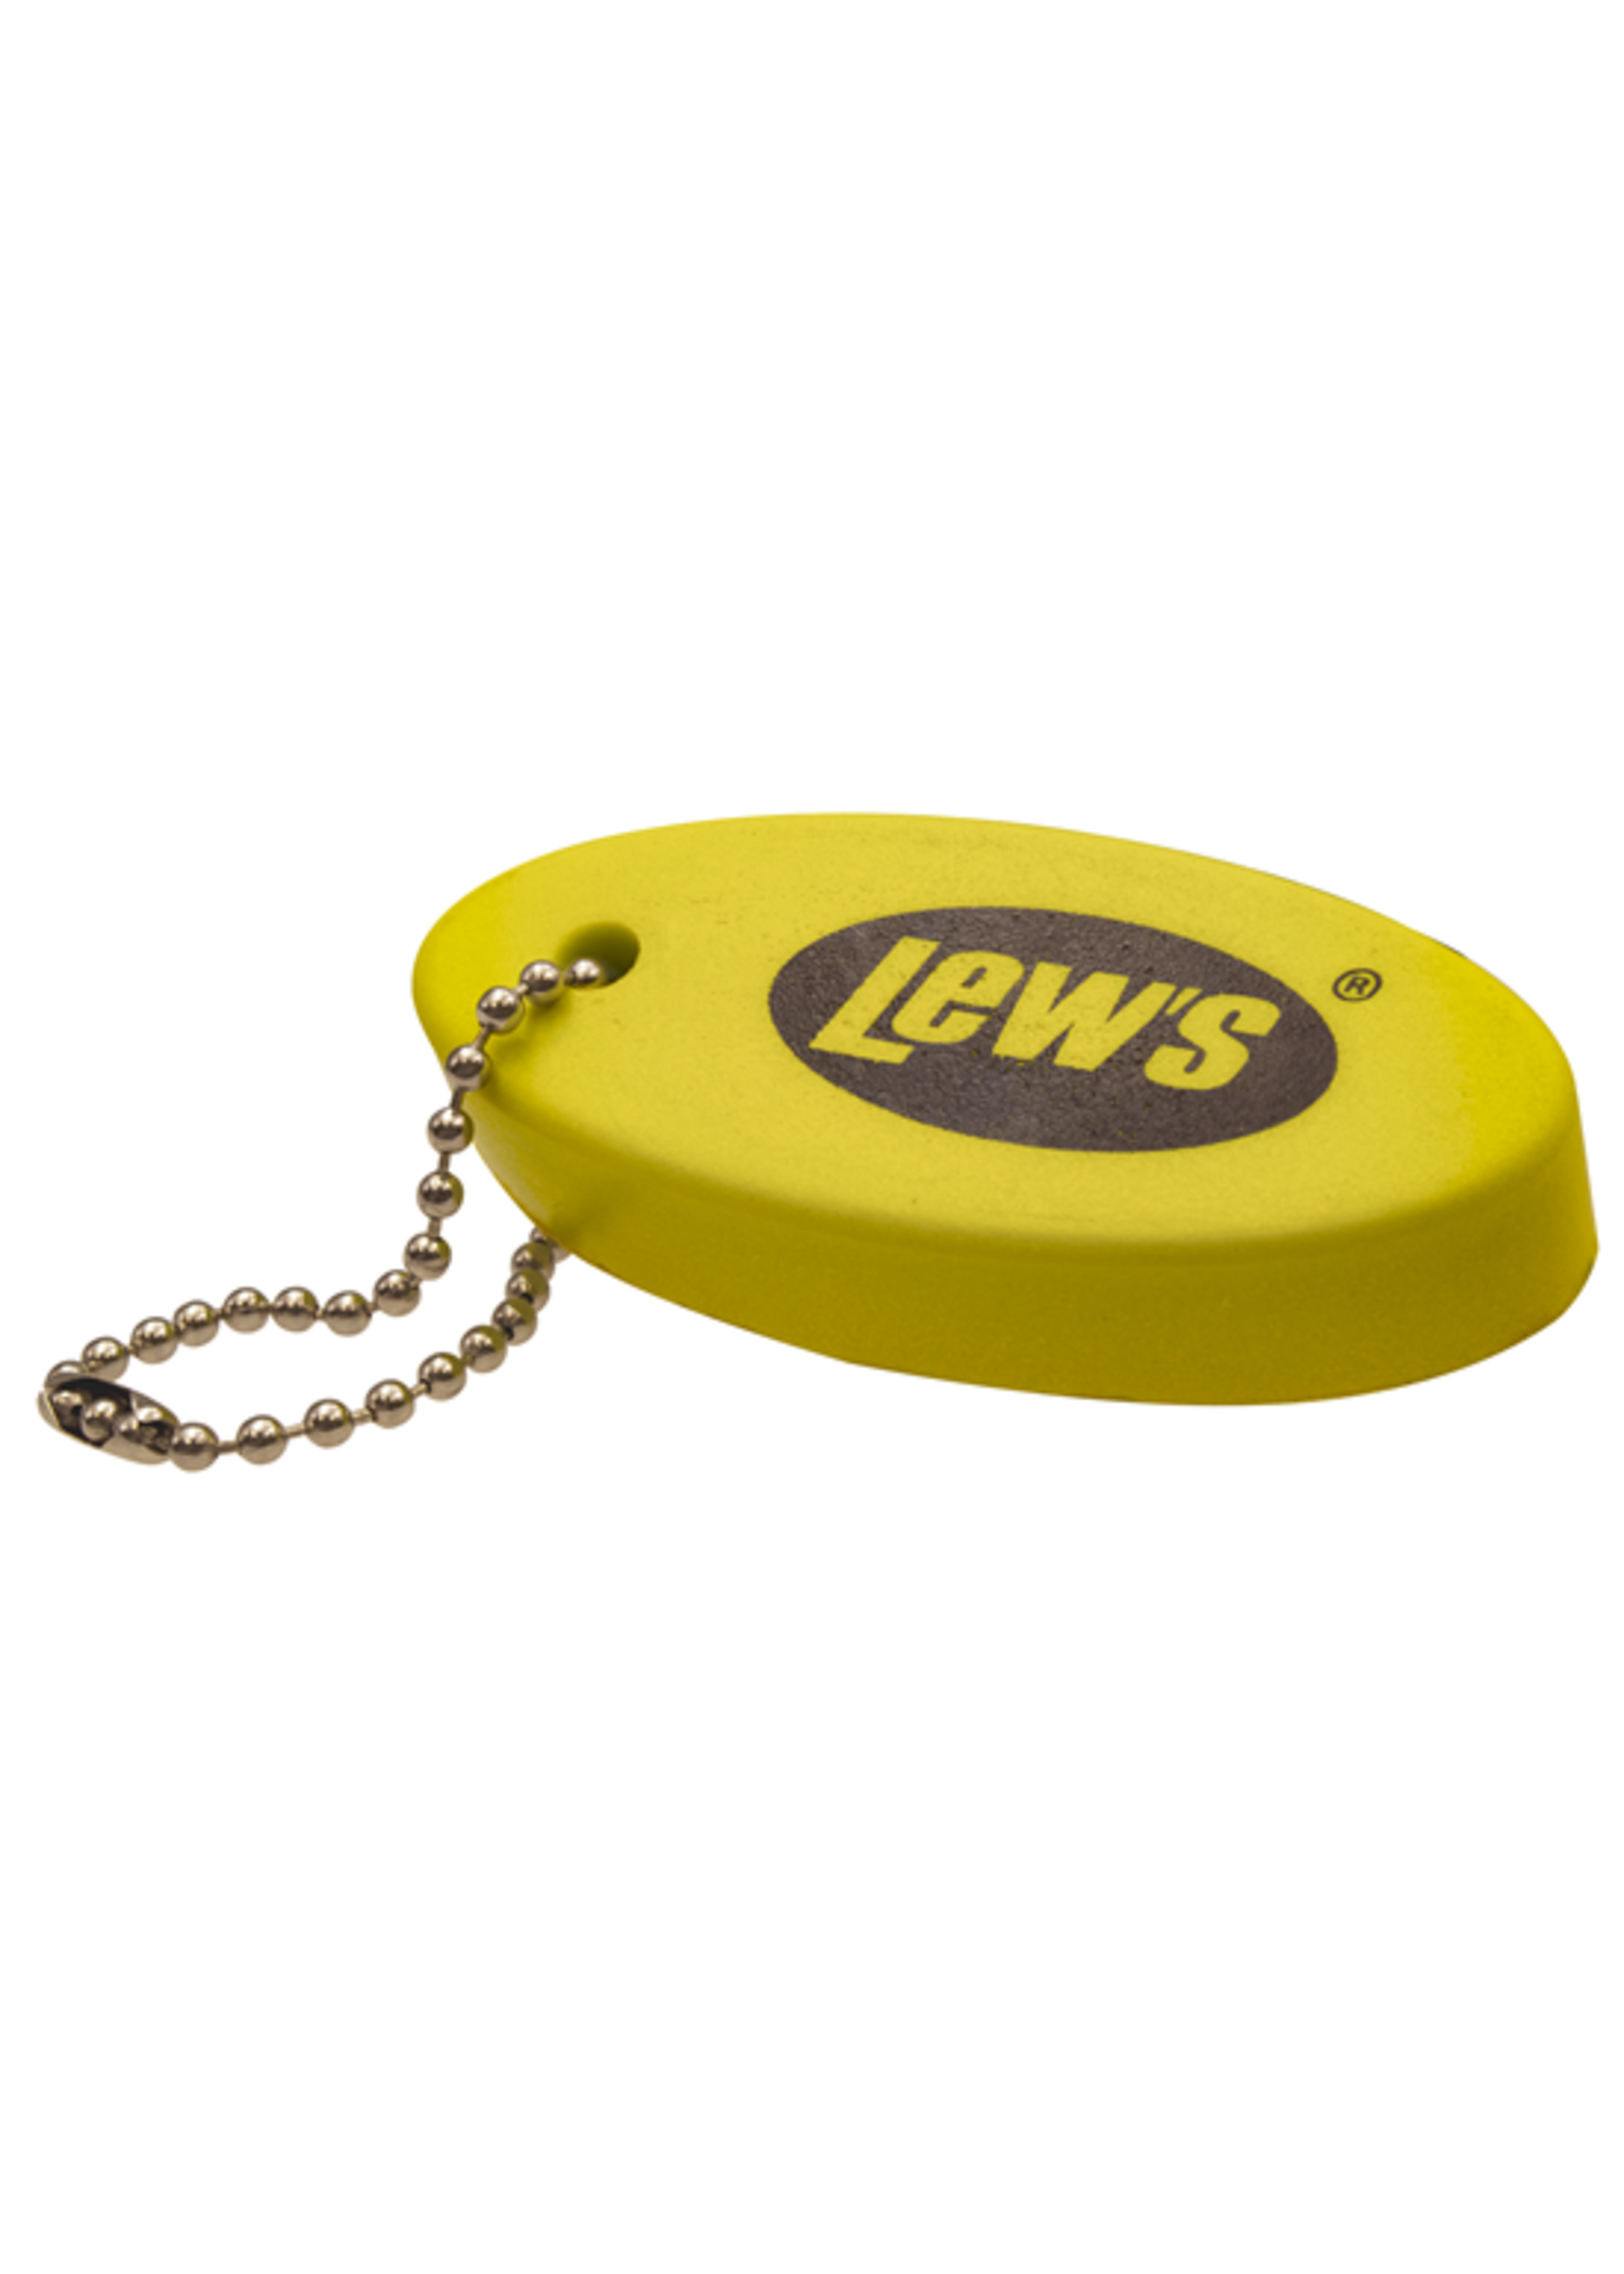 Lew's Lew's Floating Key Chain